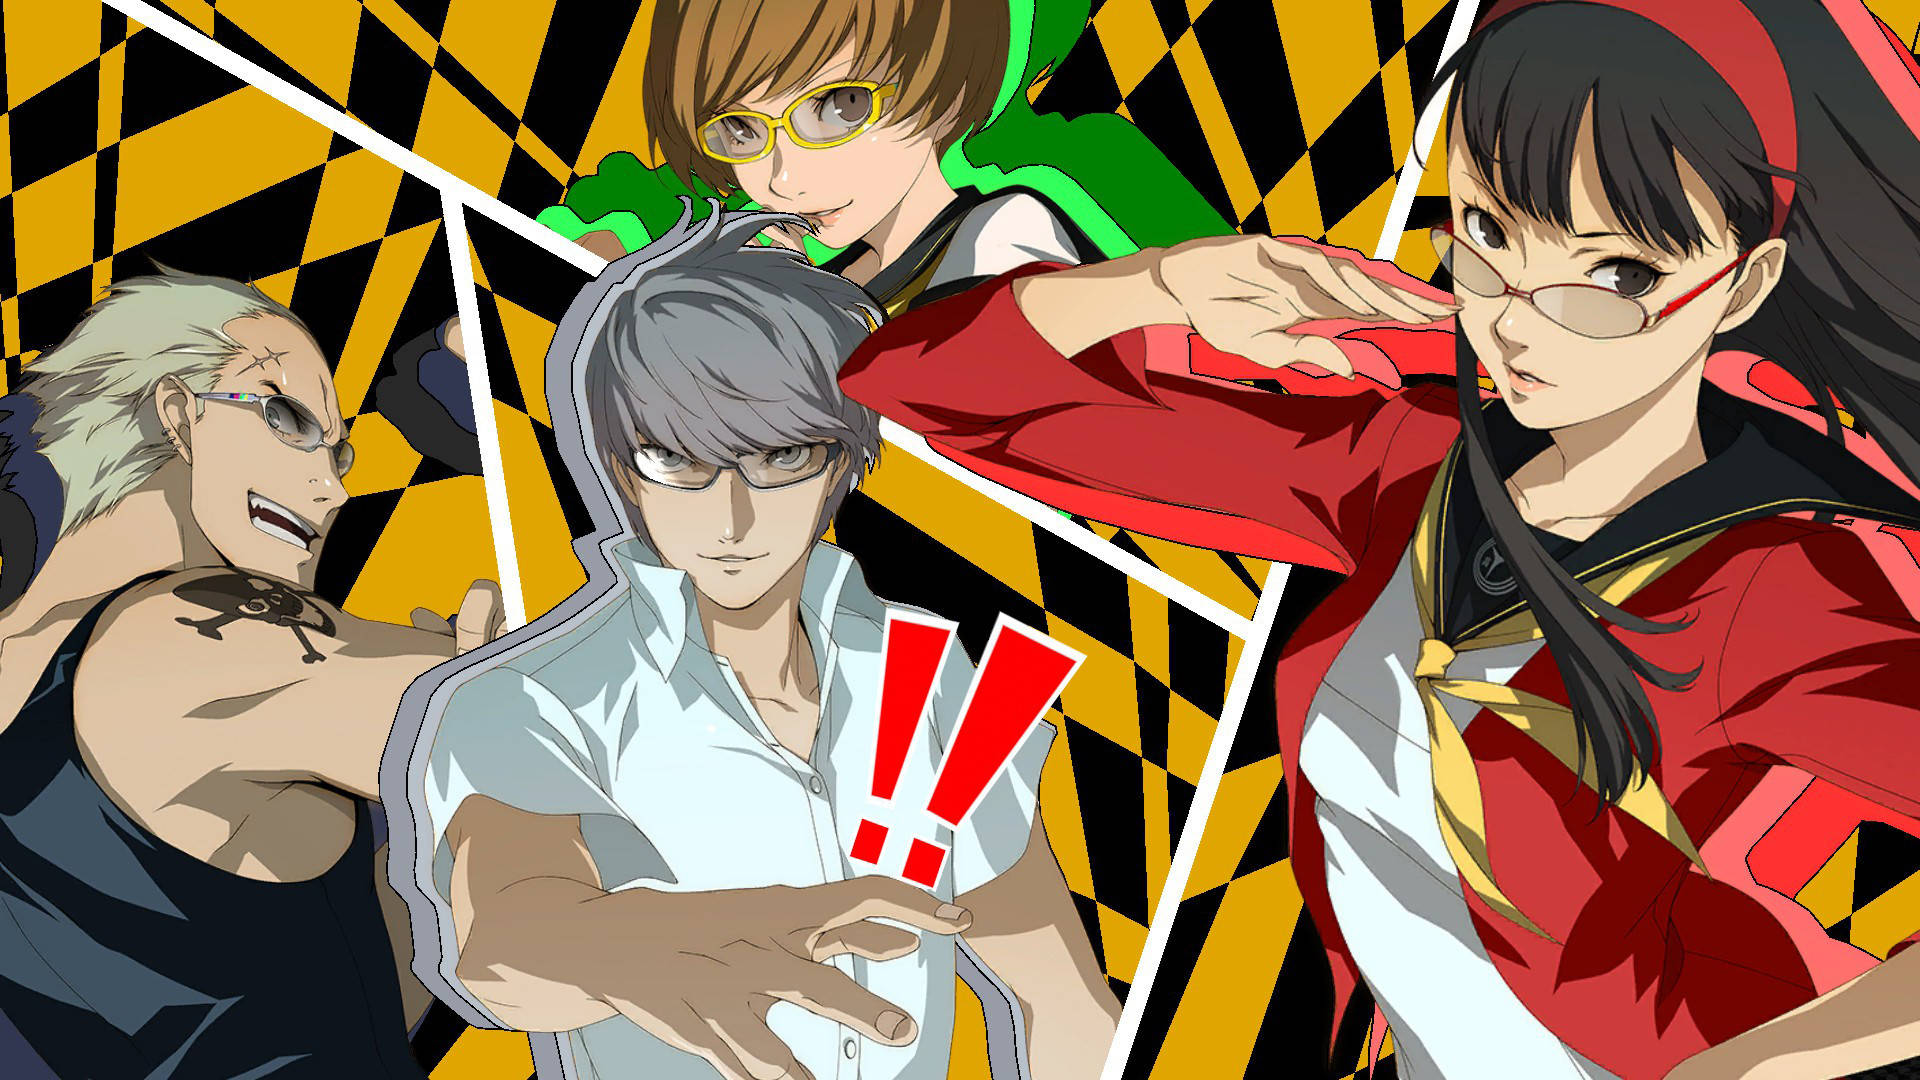 Four of the characters in Persona 4 Golden, one of the best JRPGs, posing for a team attack.